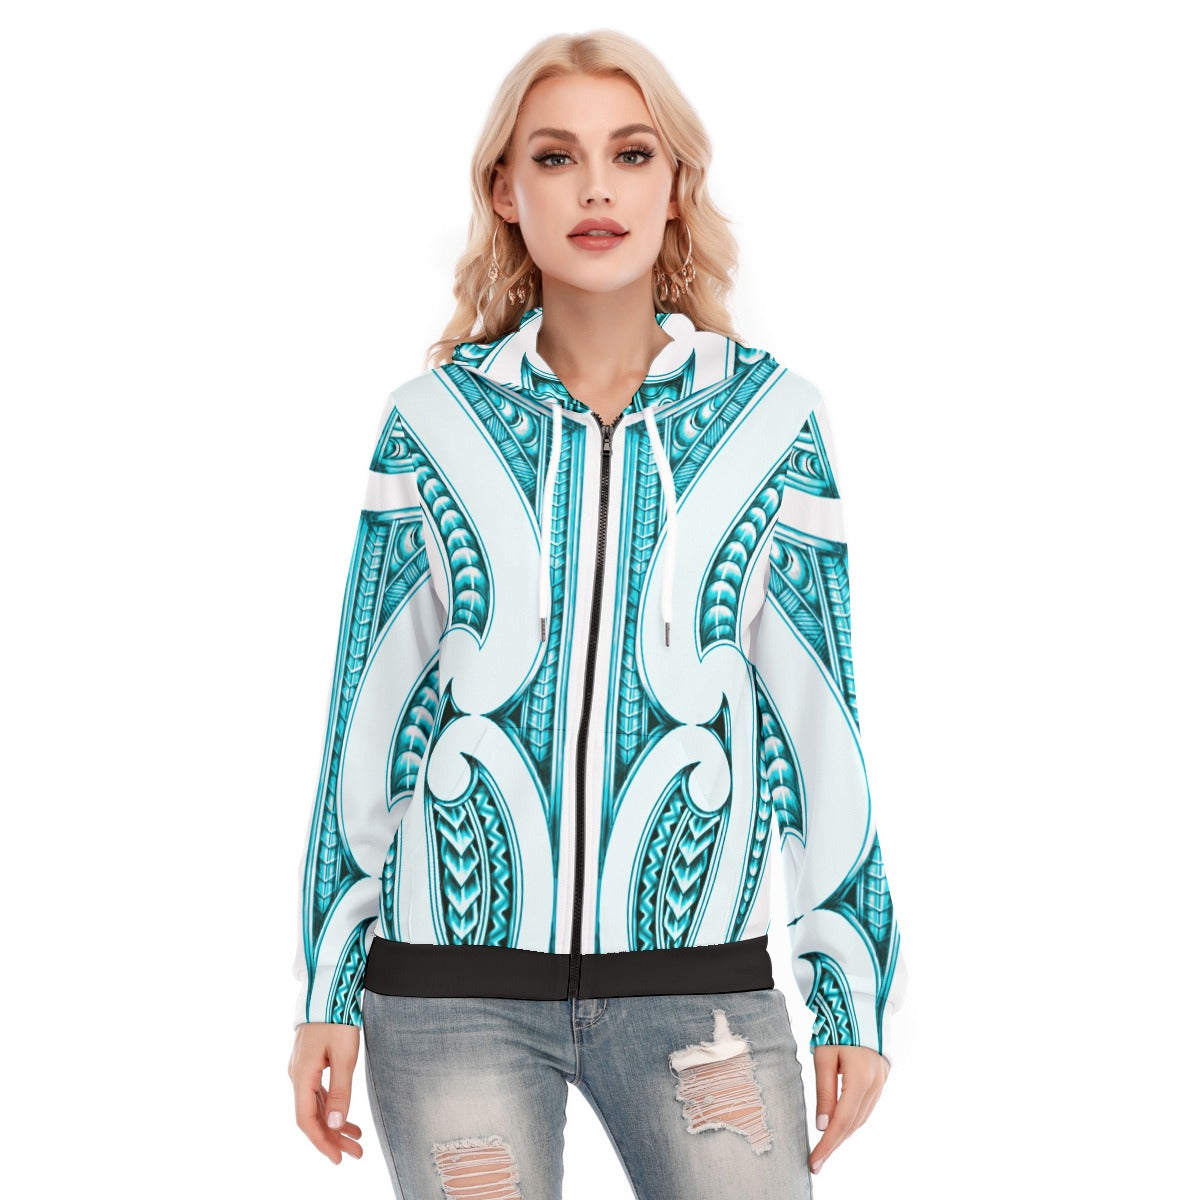 All-Over Print Women's Hoodie With Zipper